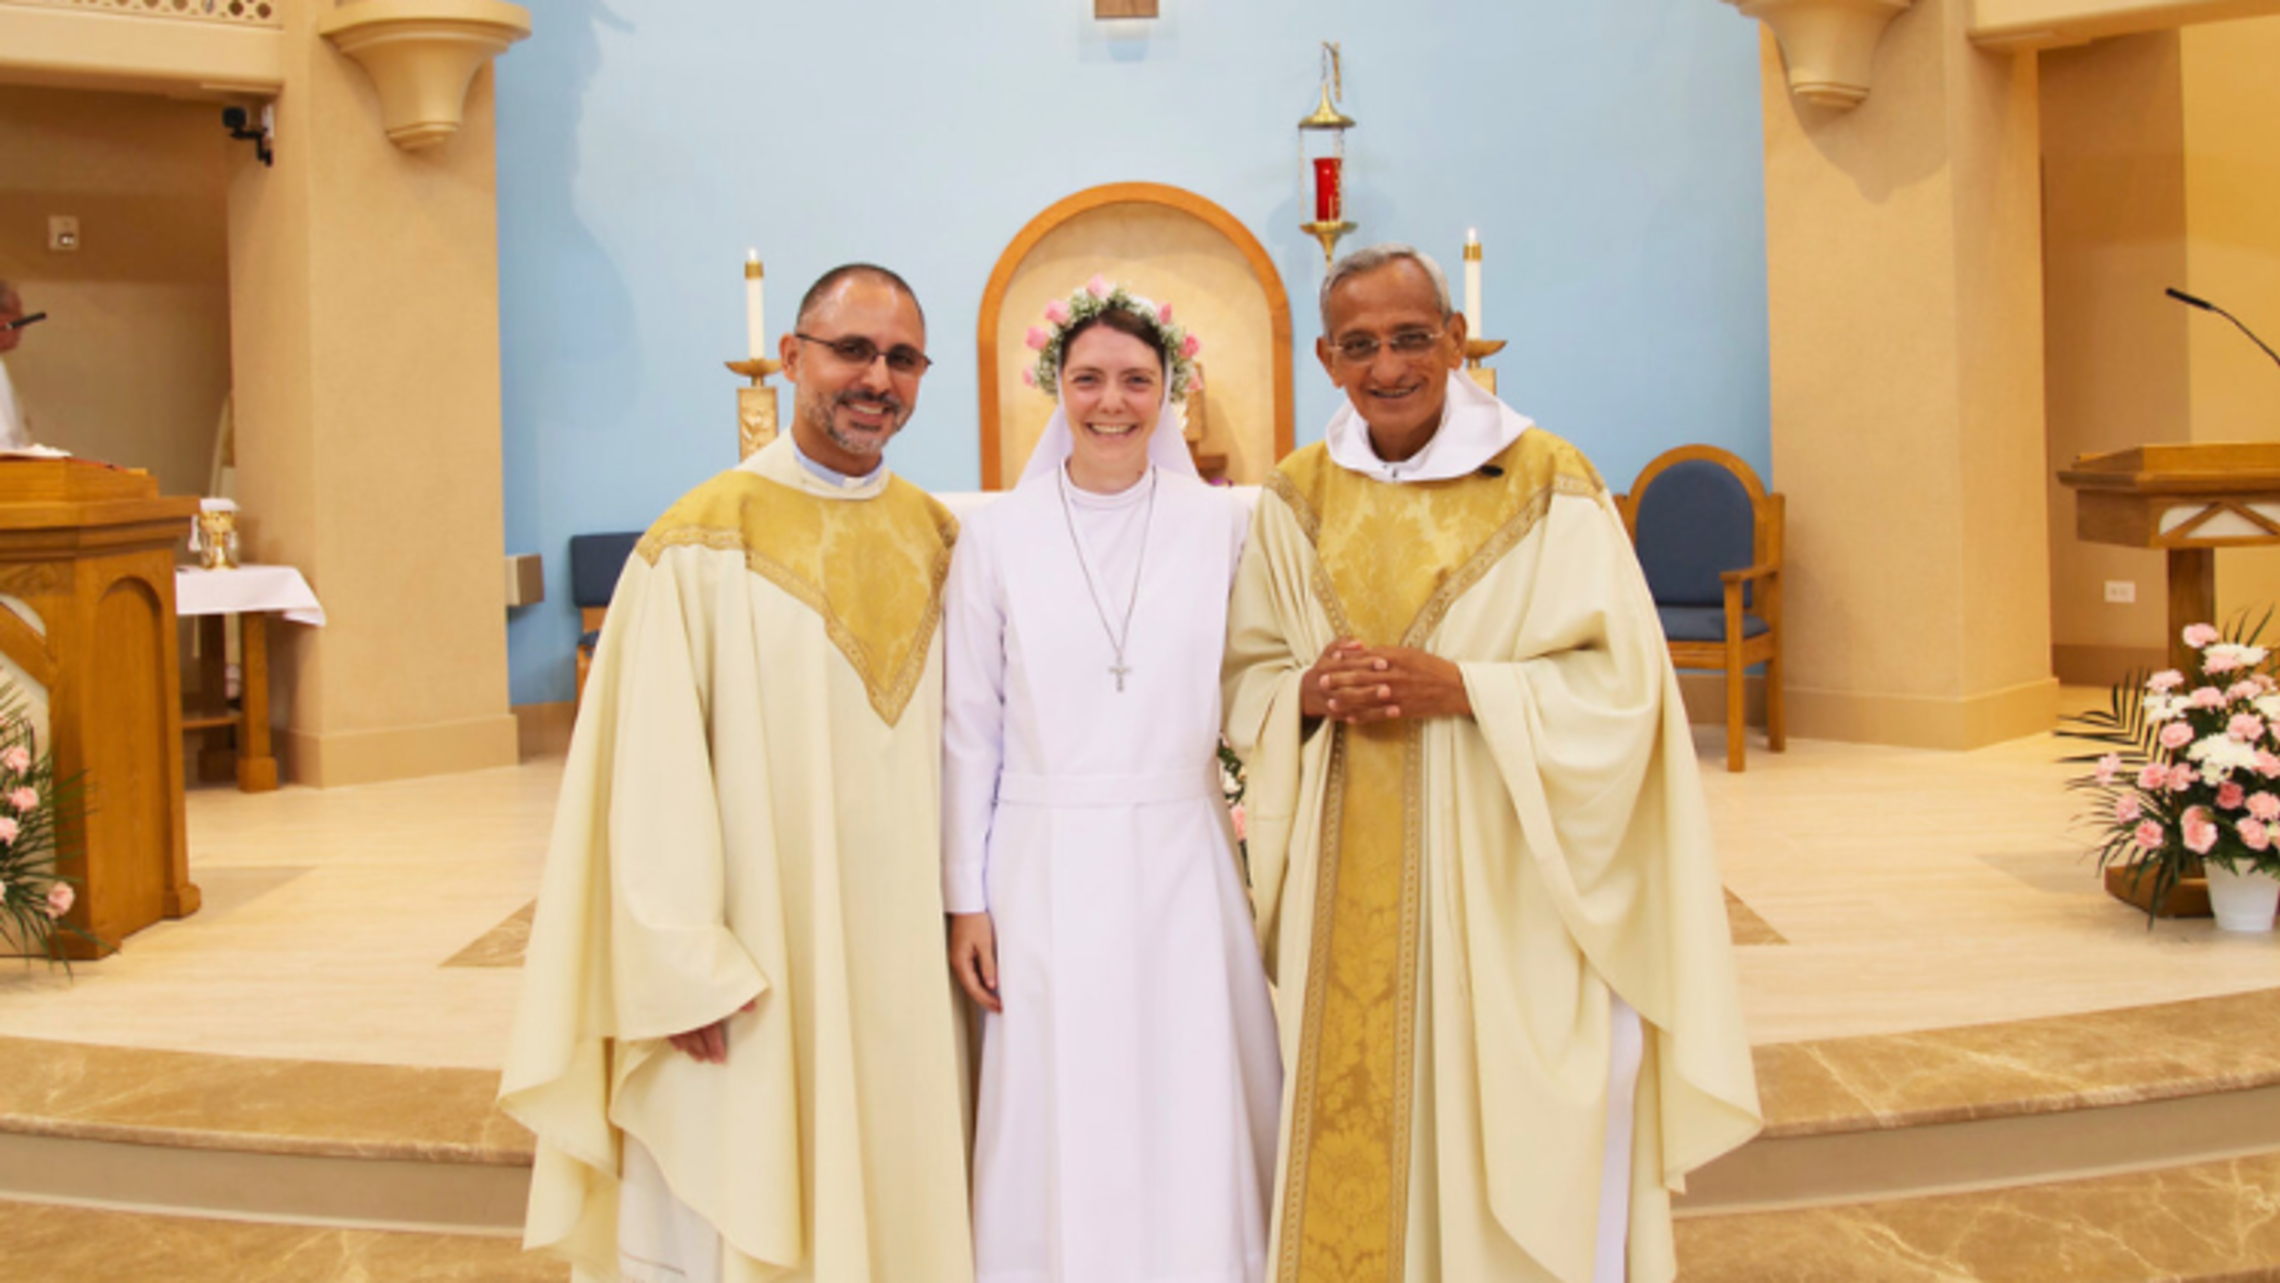 Fr. Abe, Sr. Kelly and Fr. Pascual